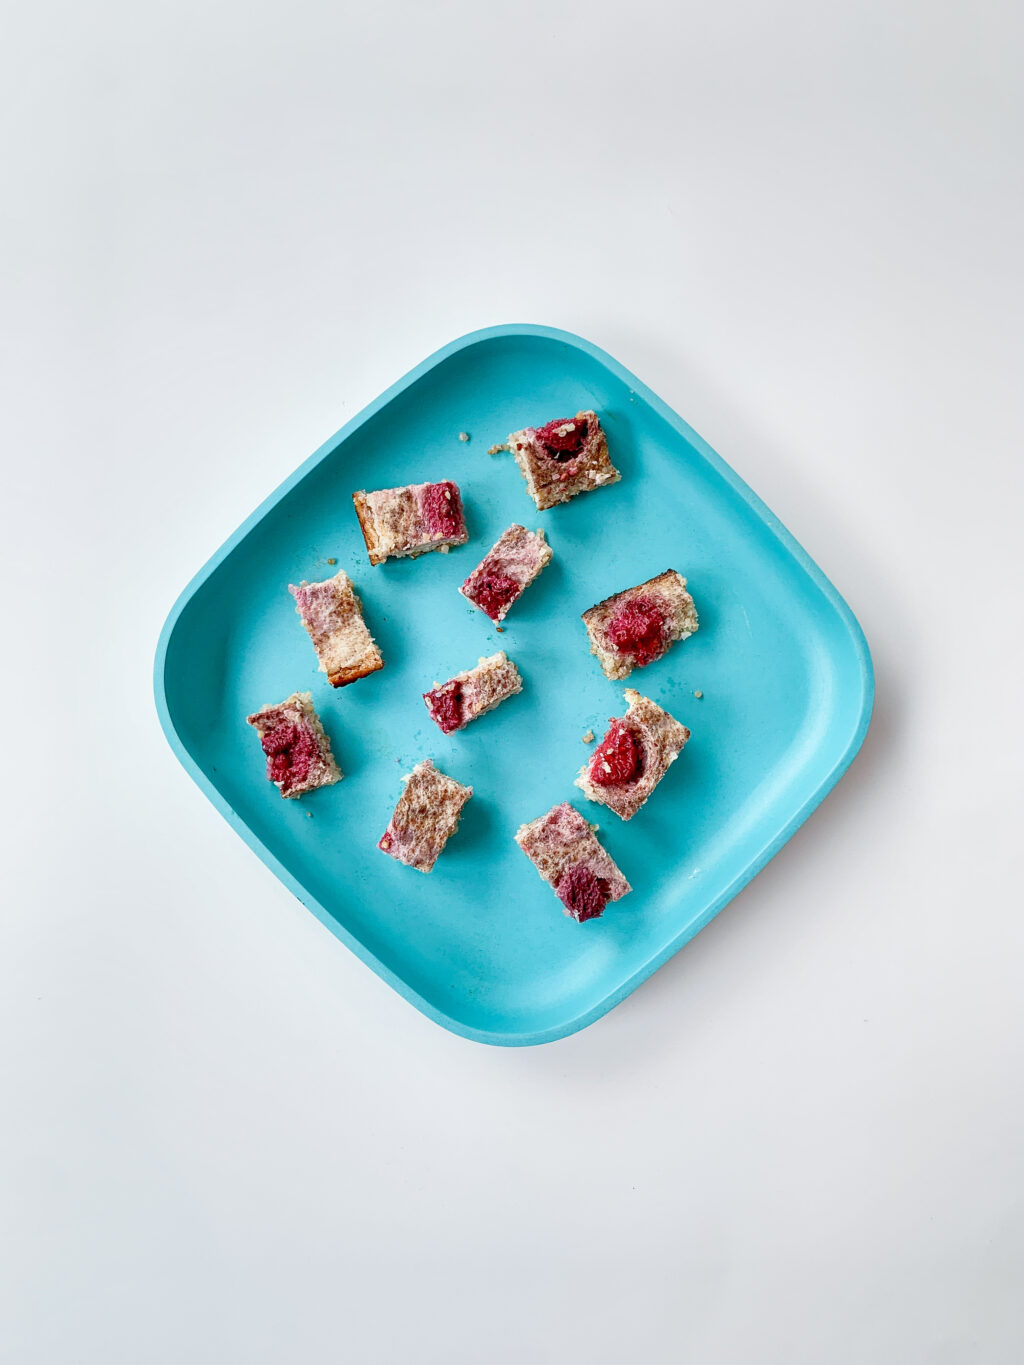 top view of baby-led weaning breakfast bake made with quinoa cut into small cubes